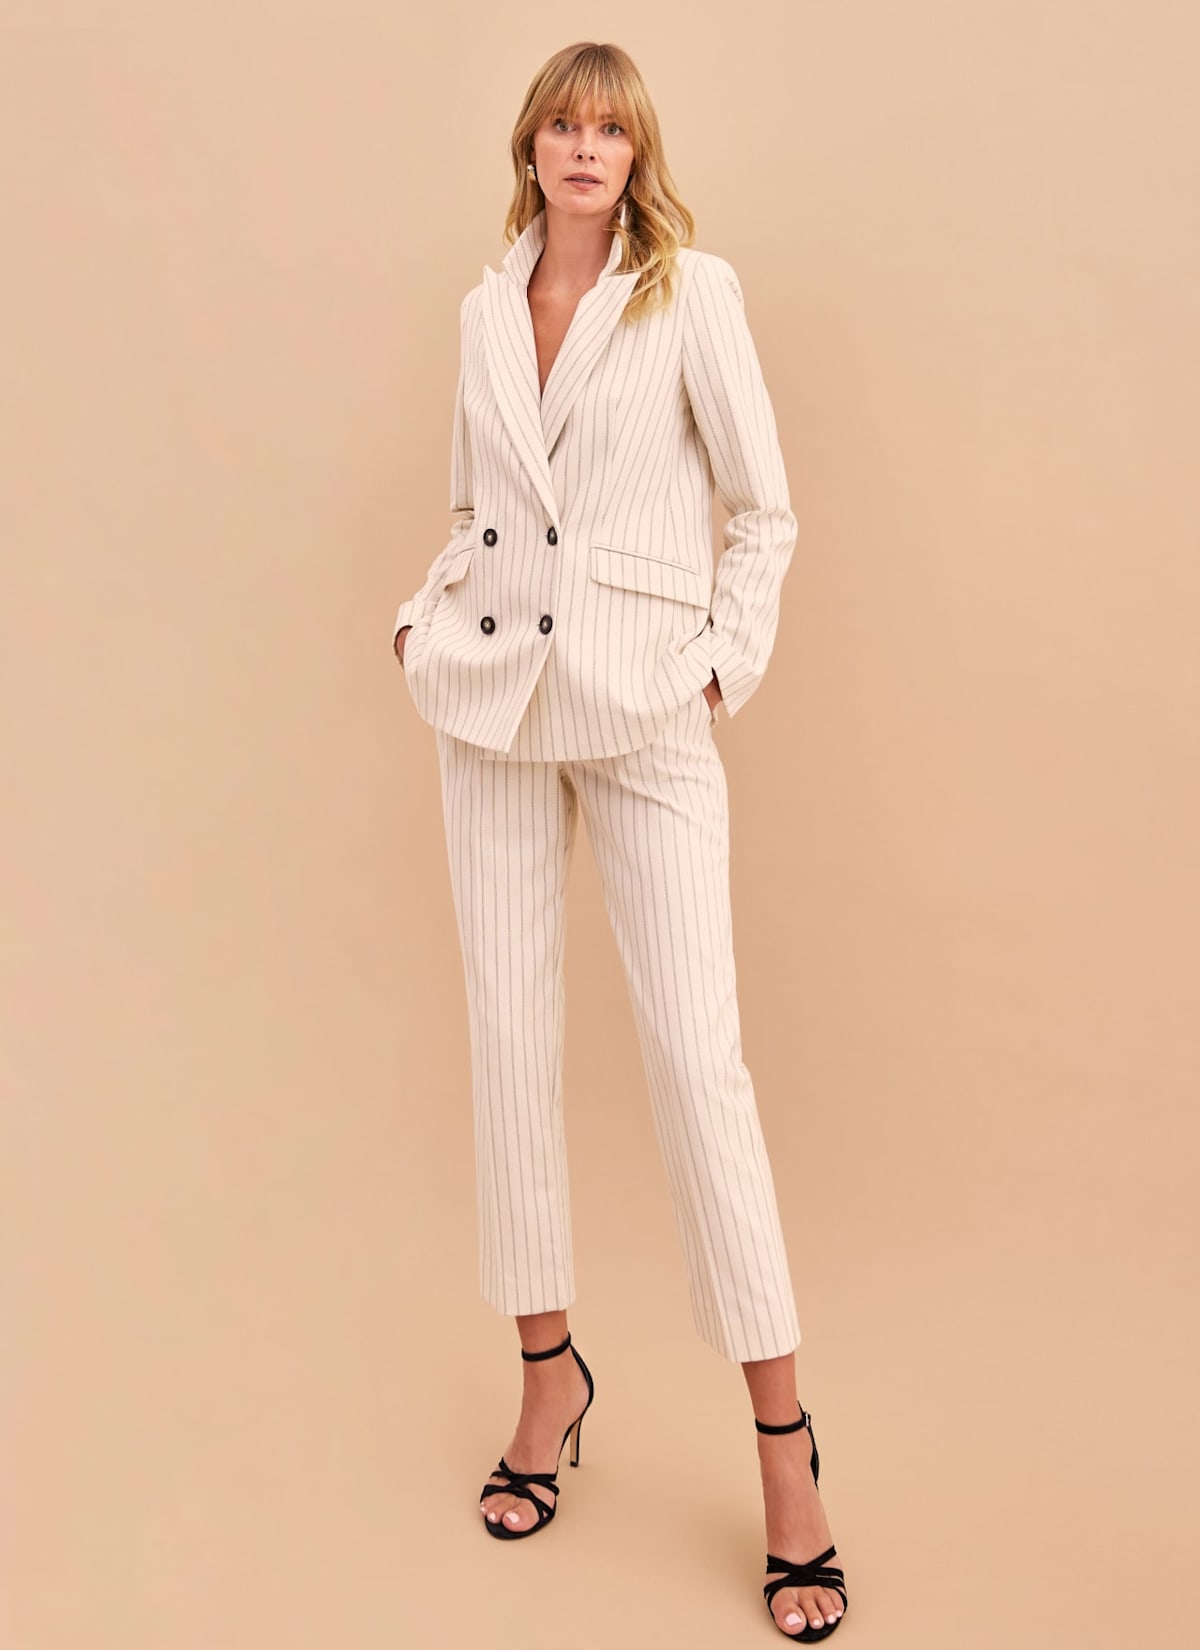 Woman modelling striped blazer with striped suit trousers and black heels